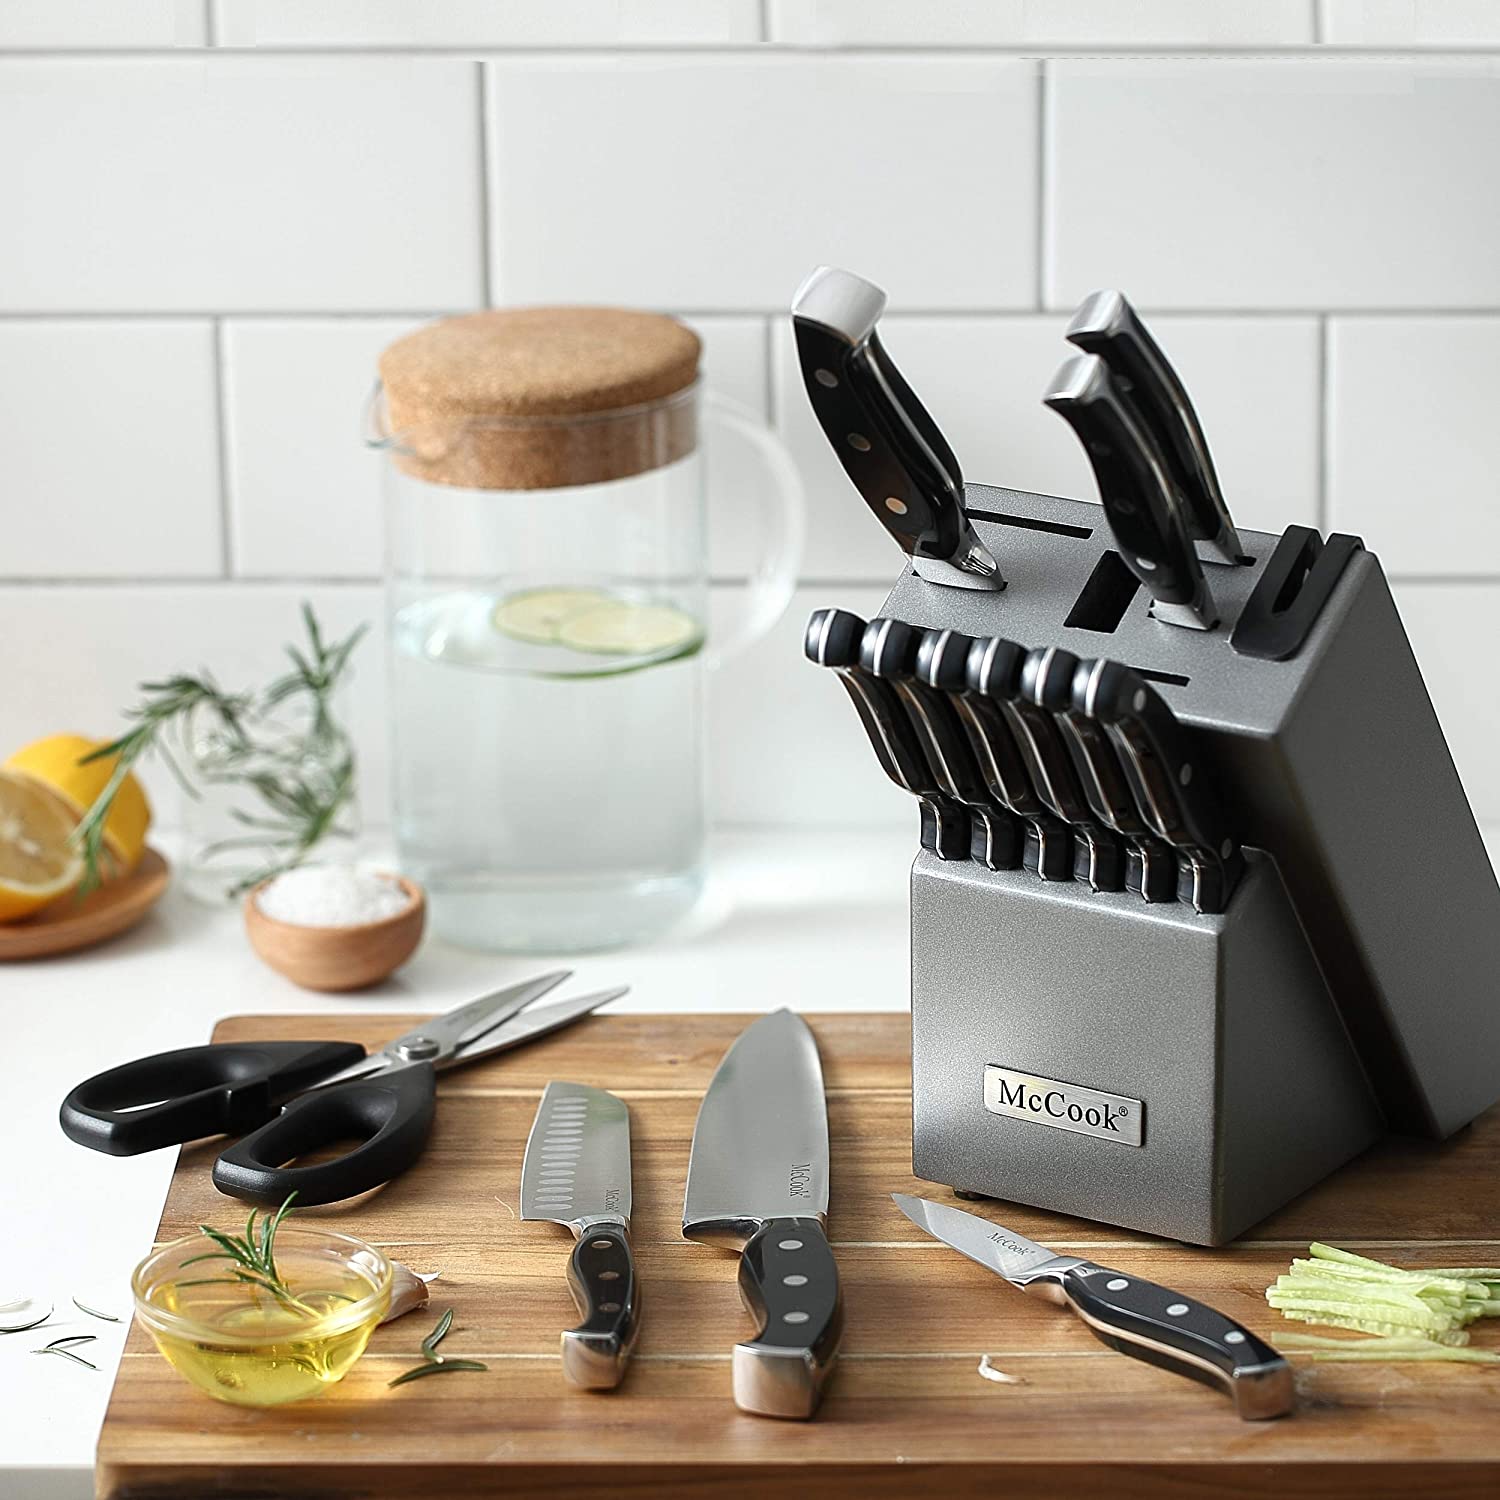 https://discounttoday.net/wp-content/uploads/2022/11/McCook%C2%AE-MC25A-Knife-Sets15-Pieces-German-Stainless-Steel-Kitchen-Knife-Block-Set-with-Built-in-Sharpener4.jpg